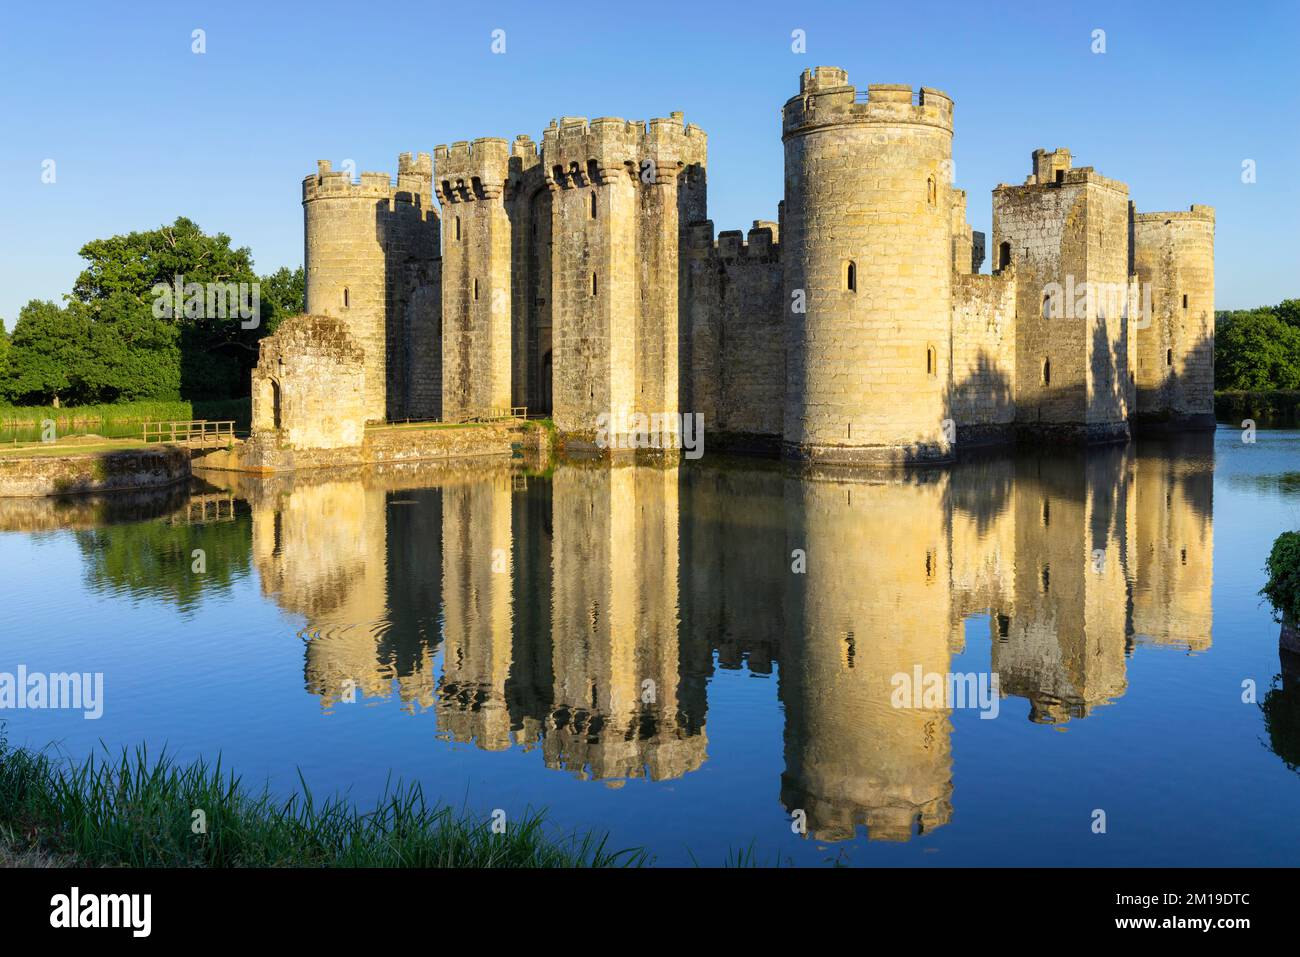 Bodiam Castle with perfect reflection in the moat - Bodiam Castle 14th-century moated castle Robertsbridge Bodiam East Sussex England UK GB Europe Stock Photo